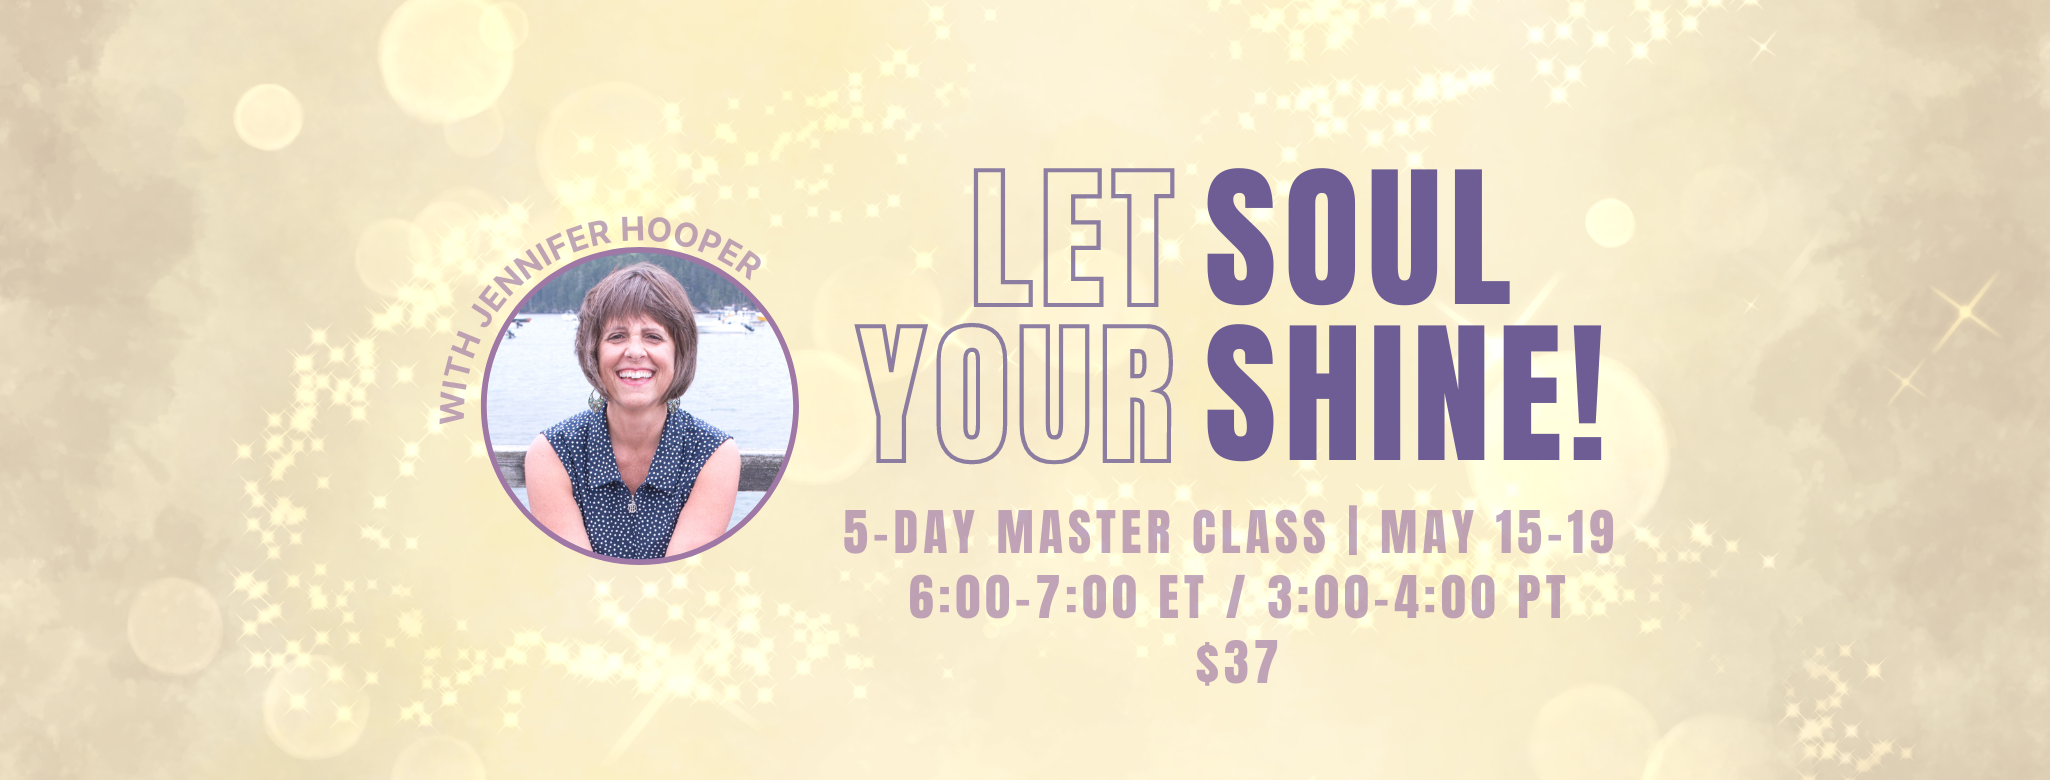 Let Your Soul Shine master class